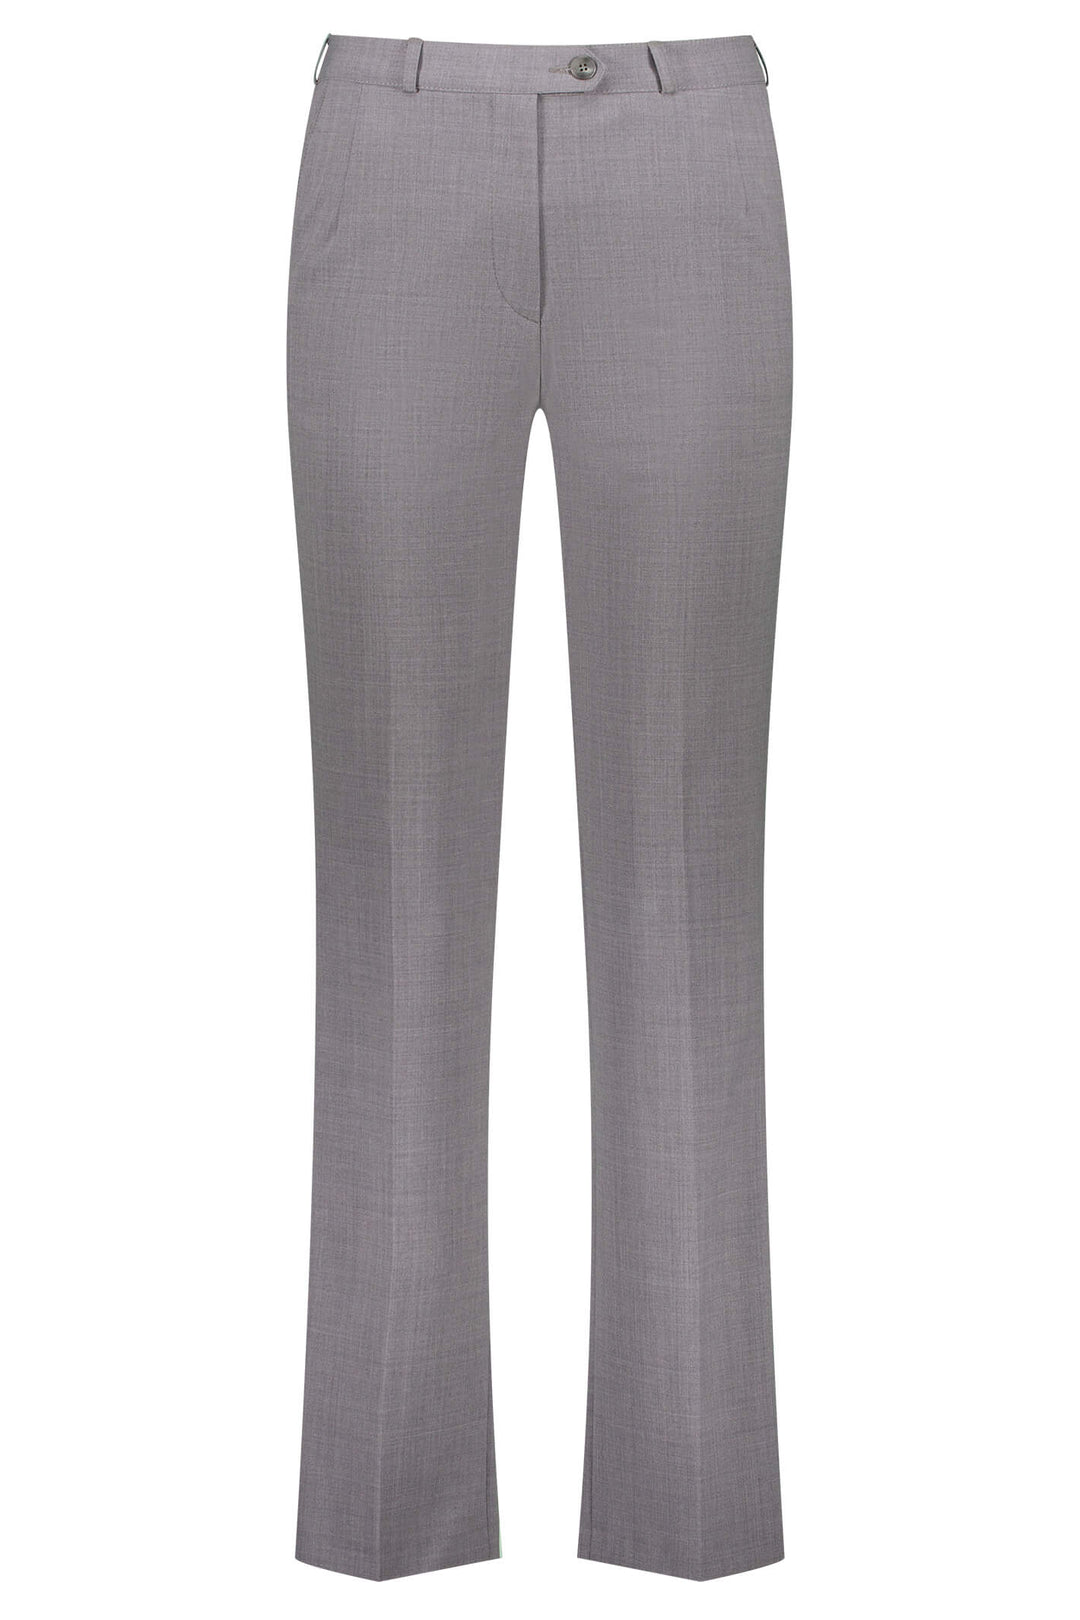 Zerres Anika 1303-983 97 Grey Wool Blend Stretch City Trousers - Shirley Allum Boutique